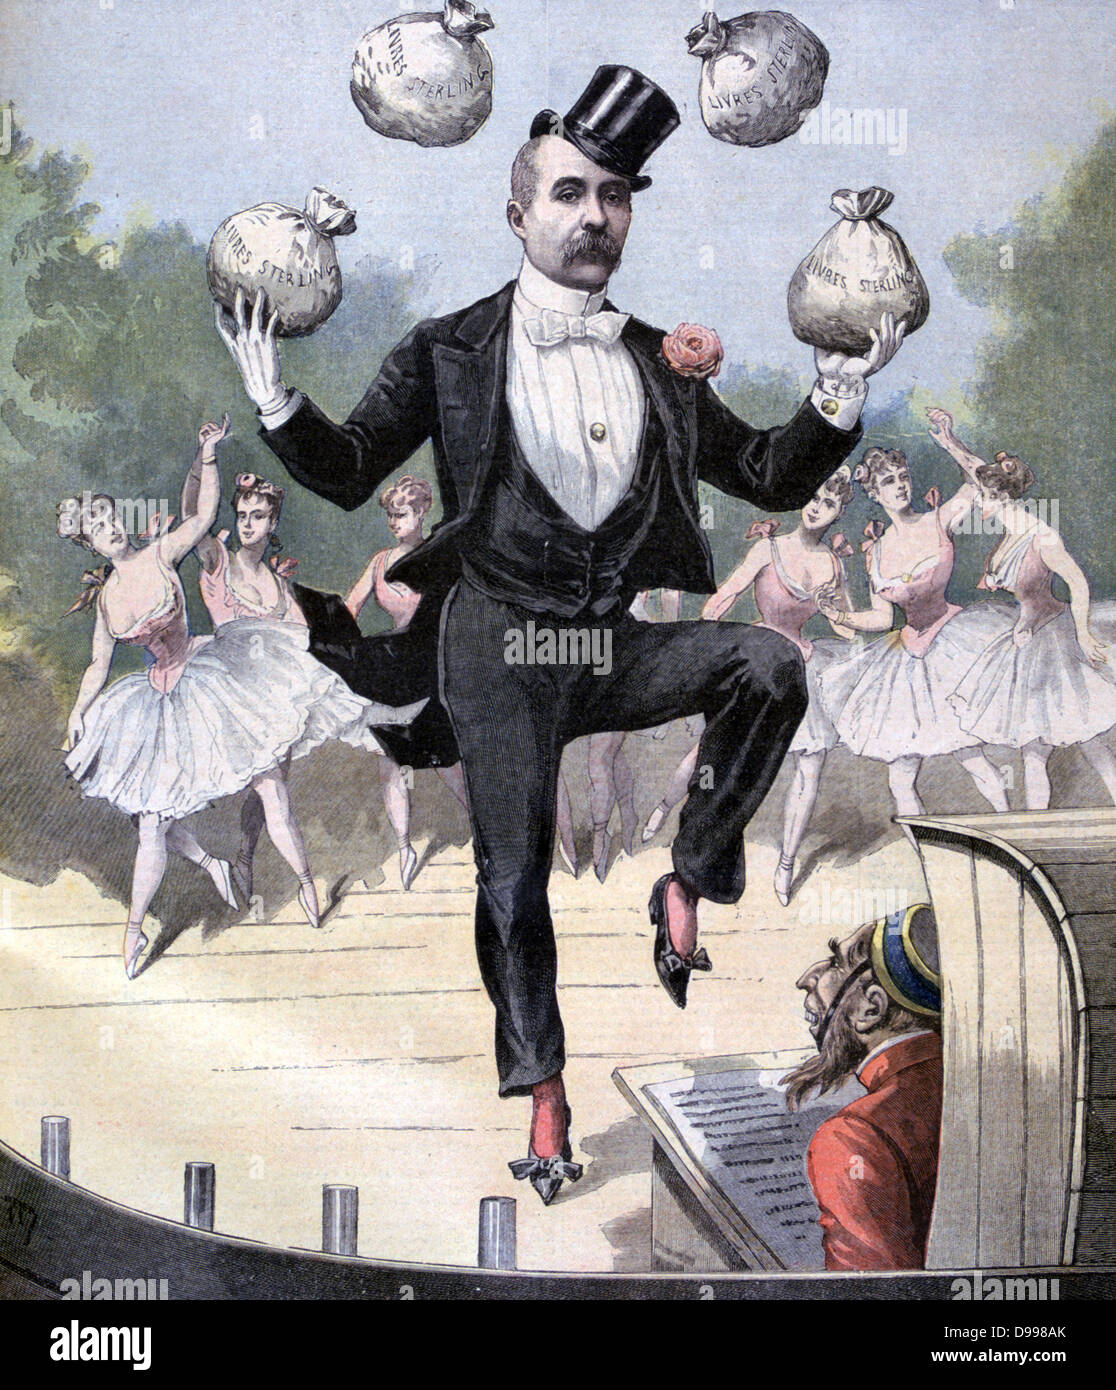 Georges Clemenceau (1841-1929) French statesman,  accused of accepting bribes in Panama Canal Scandal, defeated in election of 1893. Here juggling bags of Sterling, Britain in prompt box. 'Le Petit Journal', Paris, 19 August 1893. Stock Photo